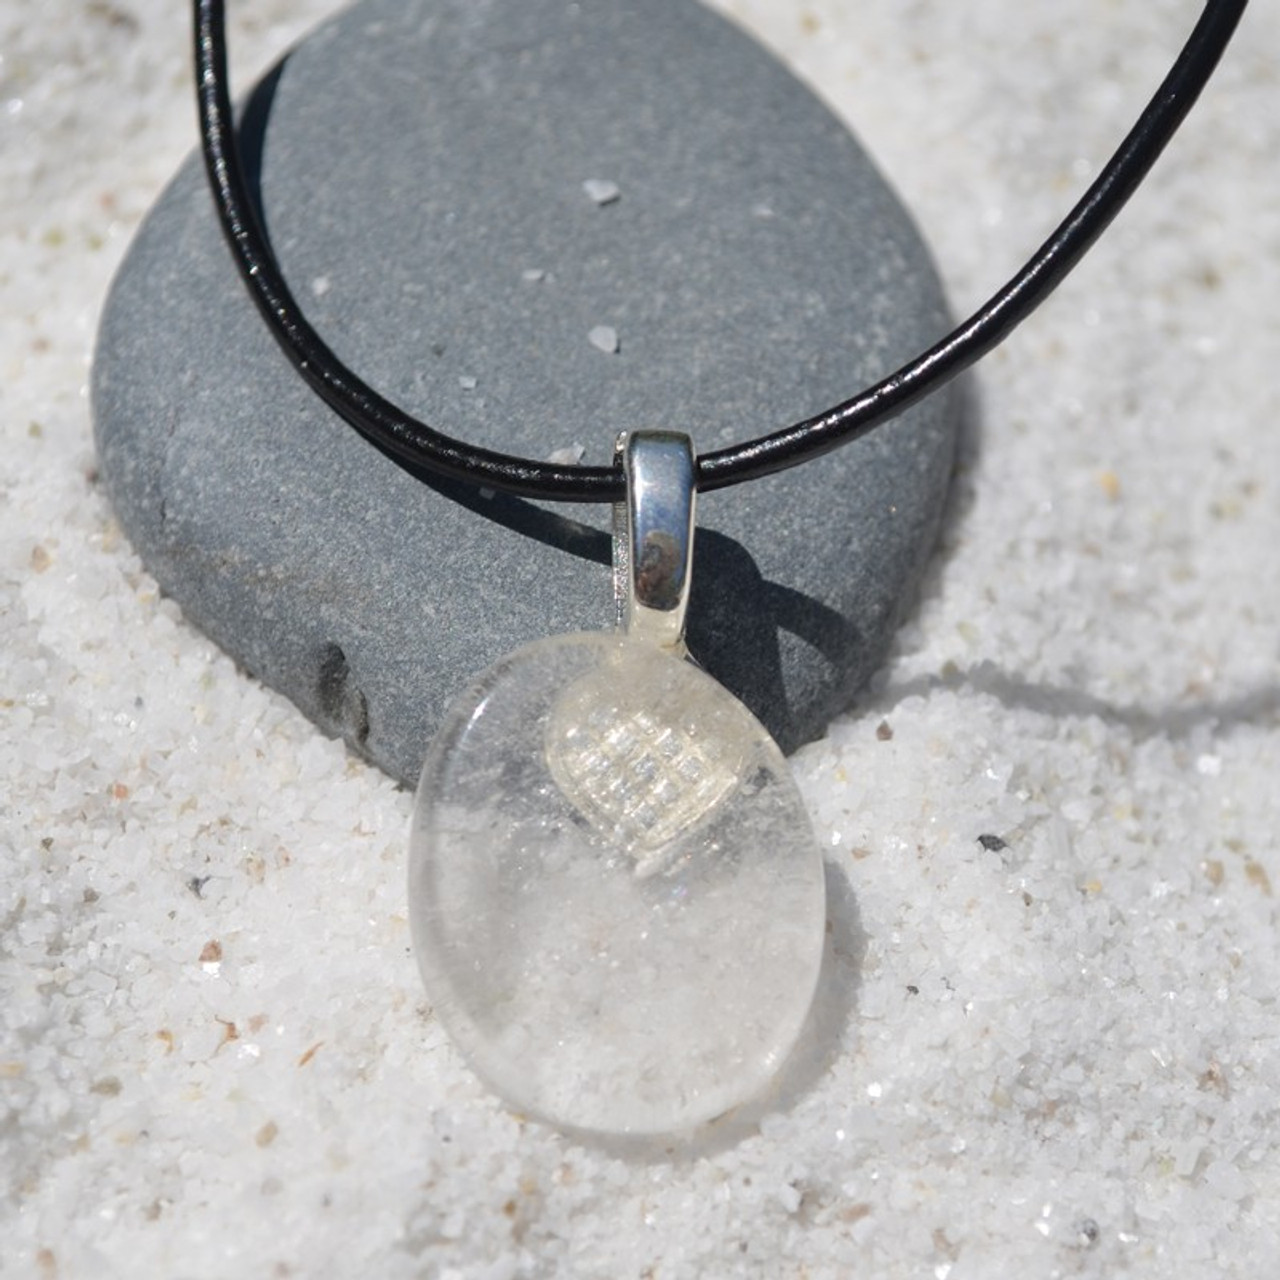 Crystal Quartz Palm Stone on a Leather Thong Necklace - Made to Order